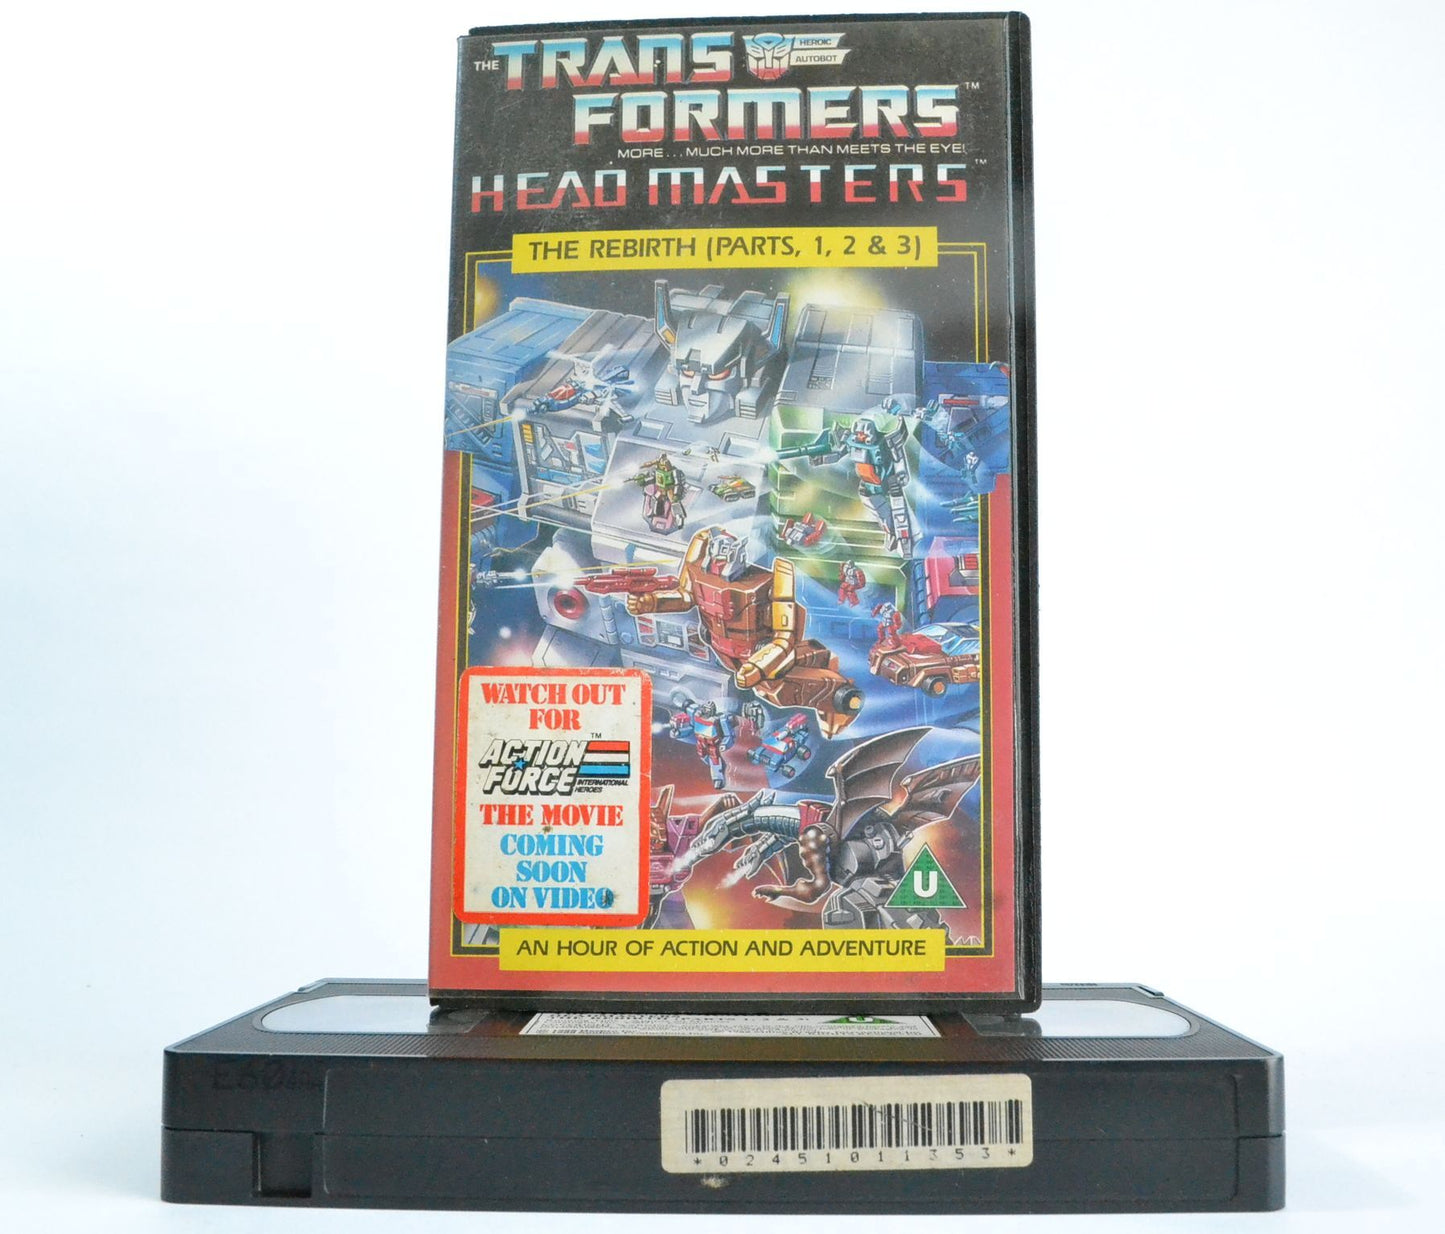 TransFormers: Head Masters; The Rebirth - (1988) M.S.D Video - Cult Children’s - VHS-